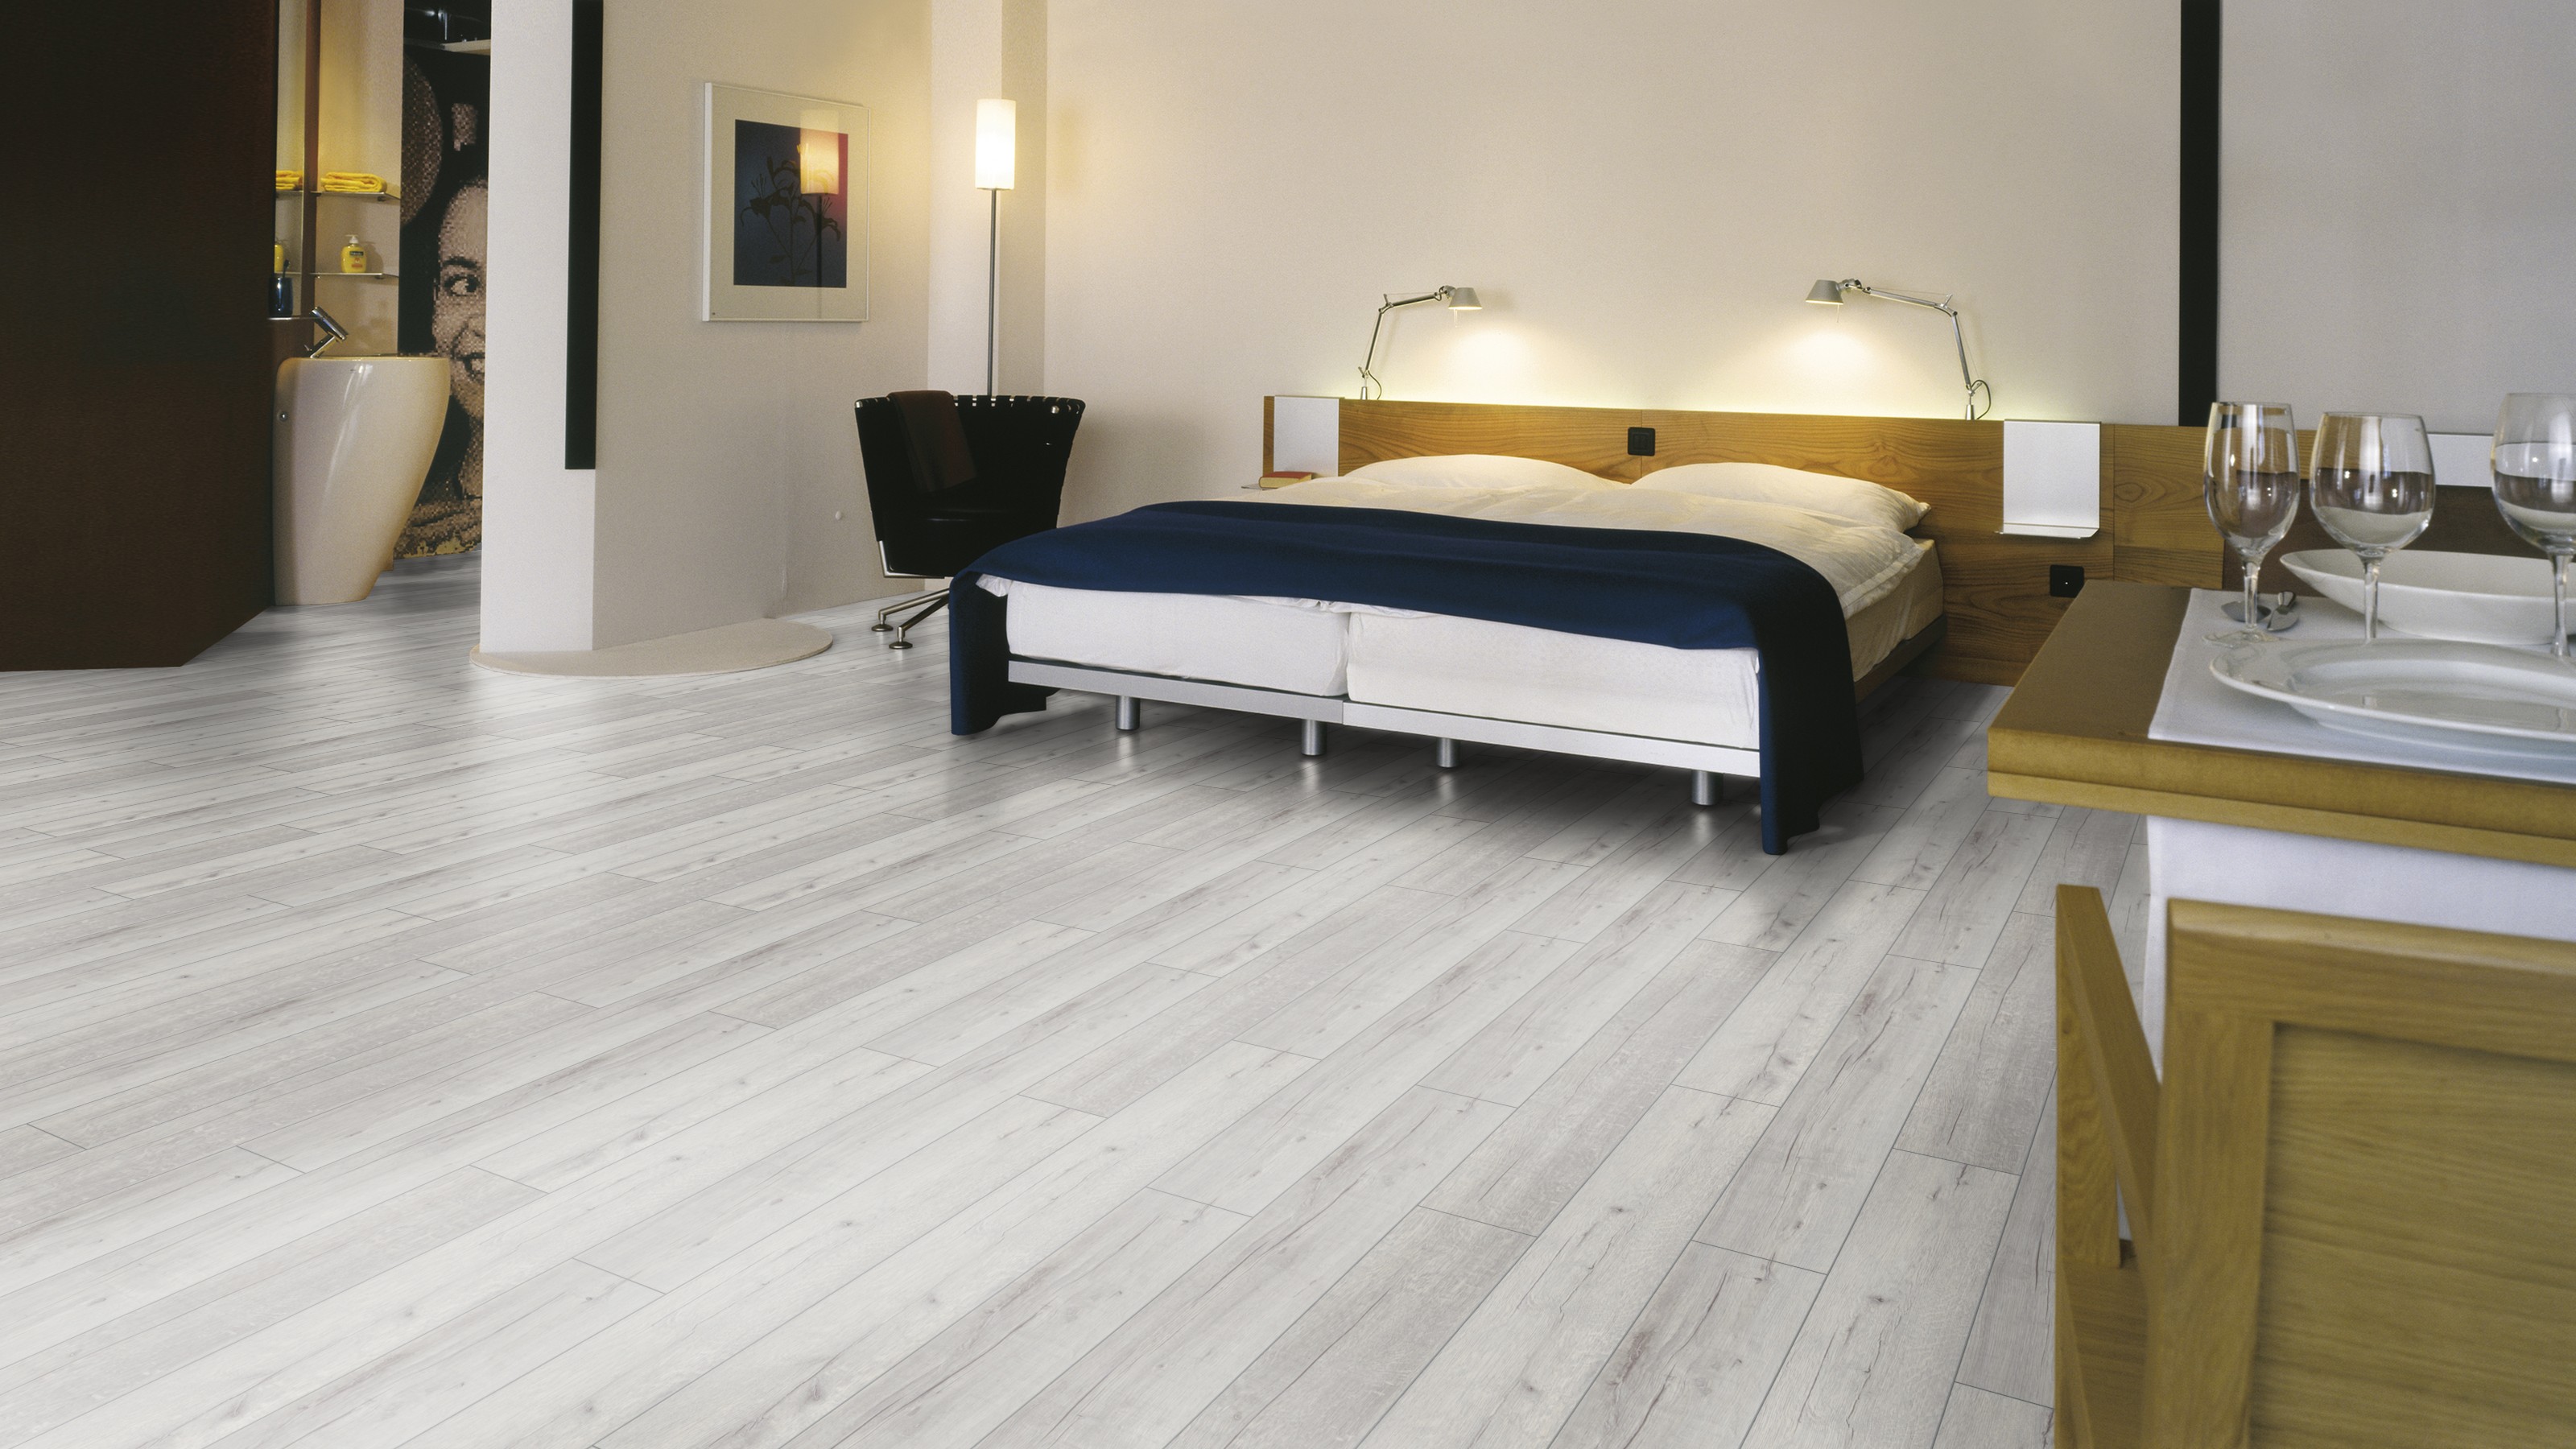 beautiful white oak in the style of the bedroom